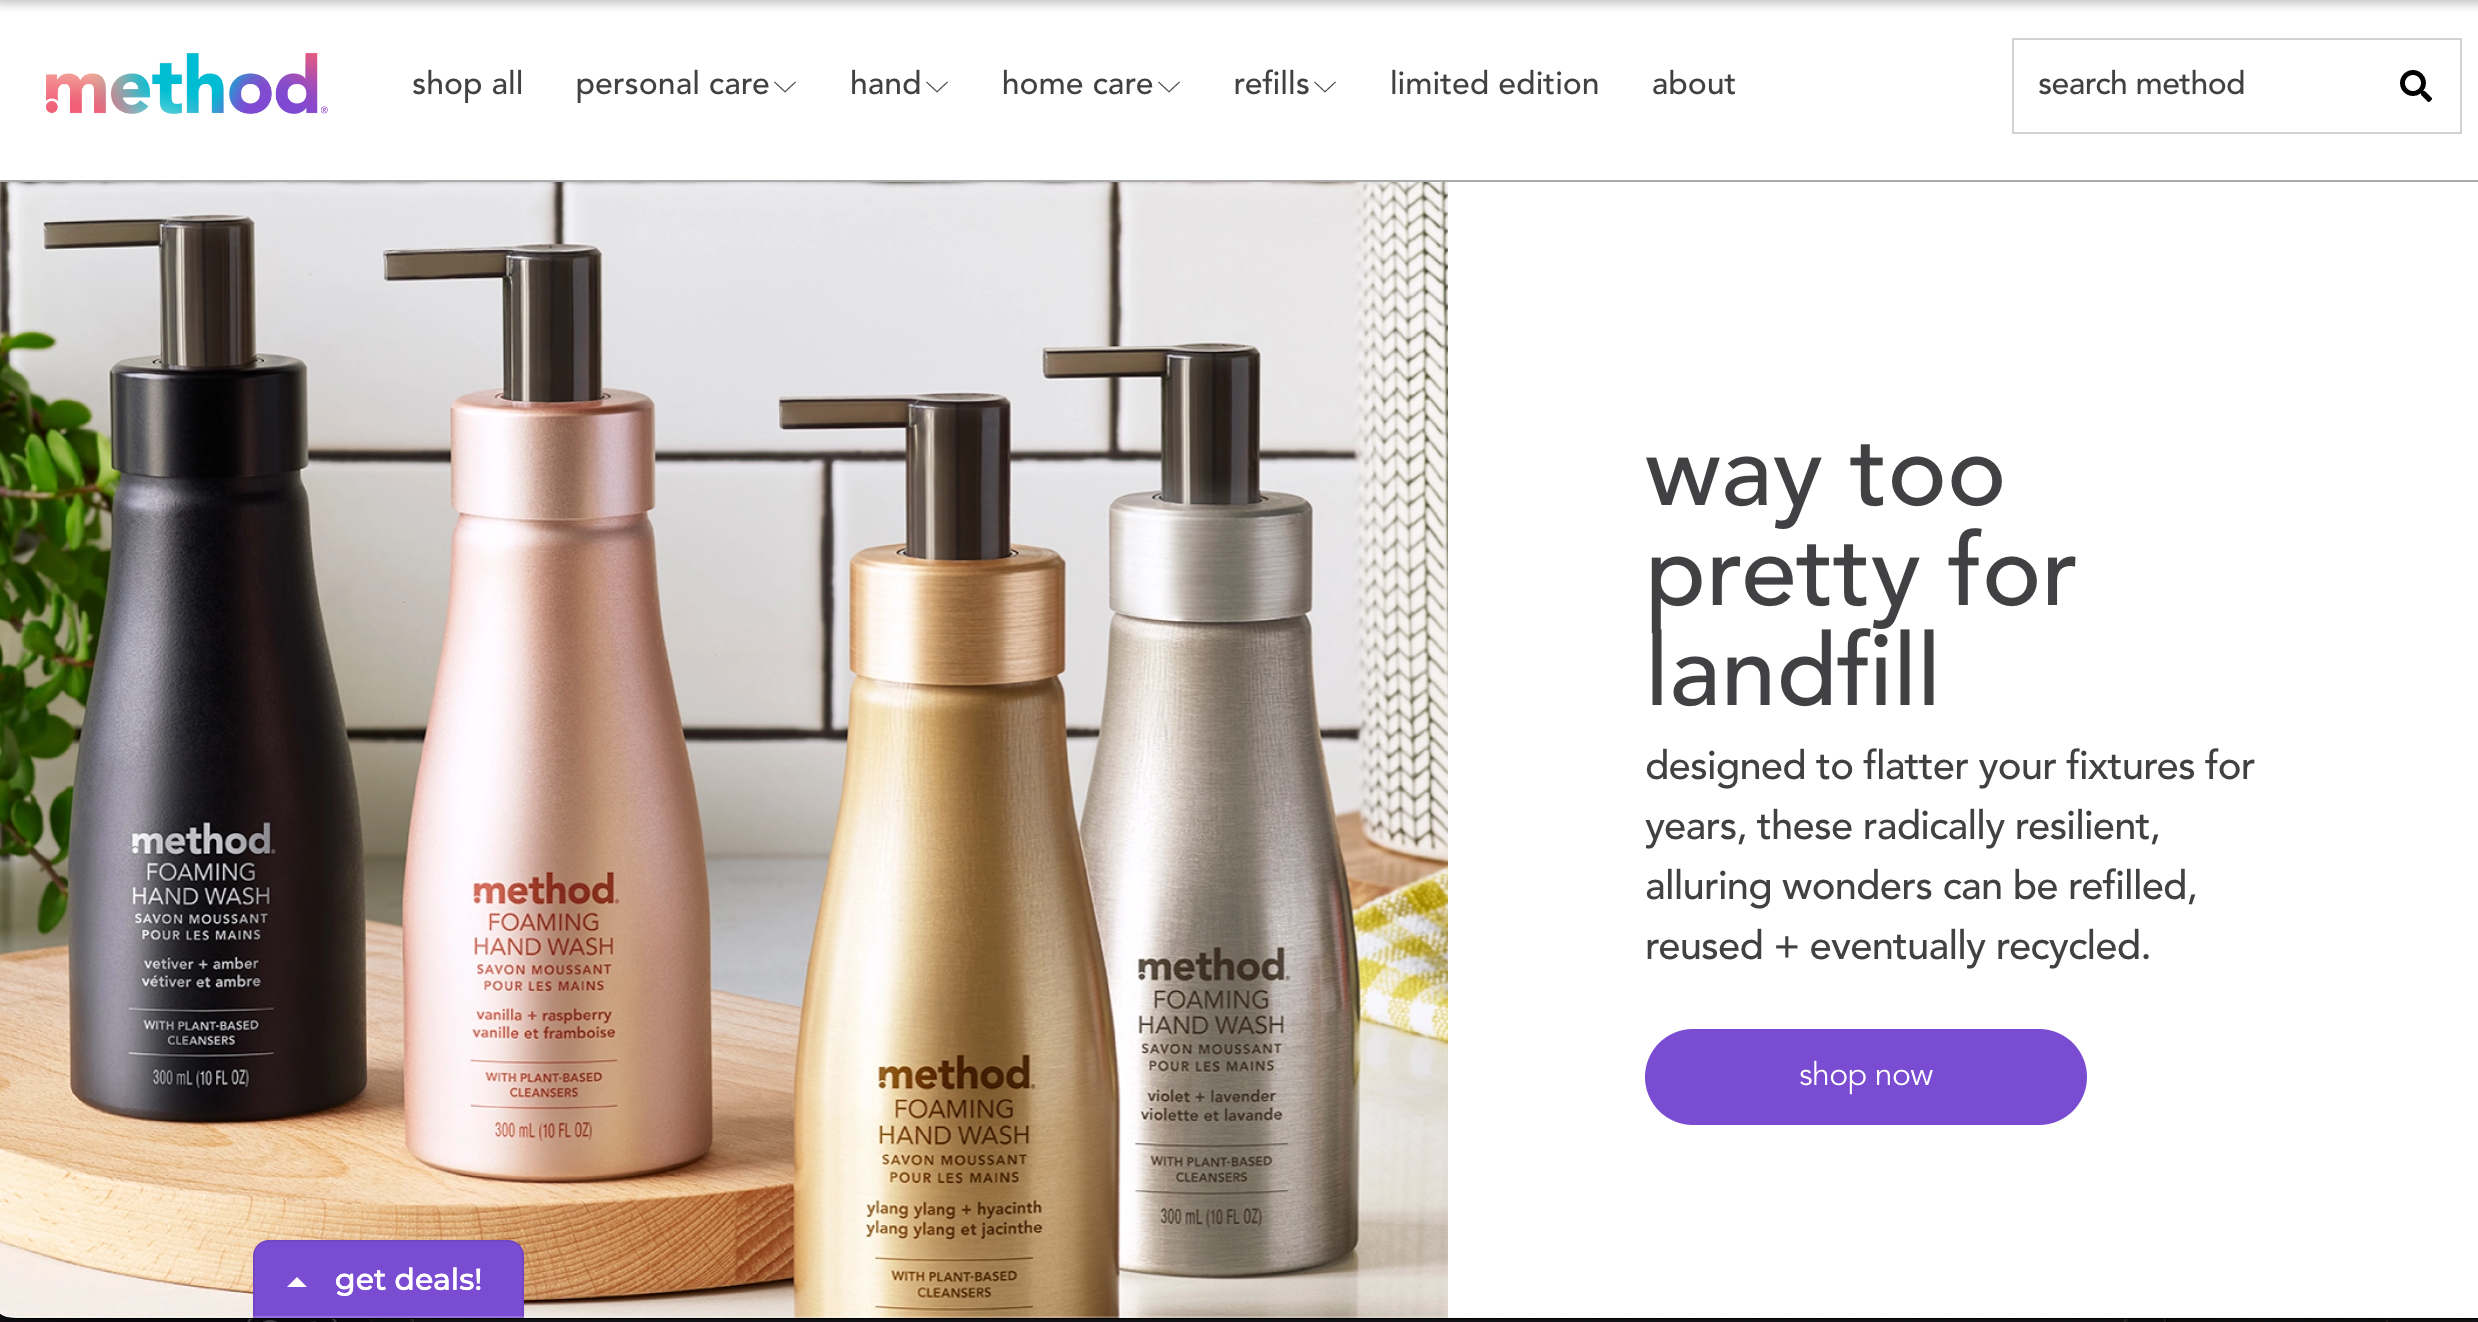 Method cleaning products homepage showing four bottles in different colors next to black text on a white background talking about the brand's packaging recyclability.